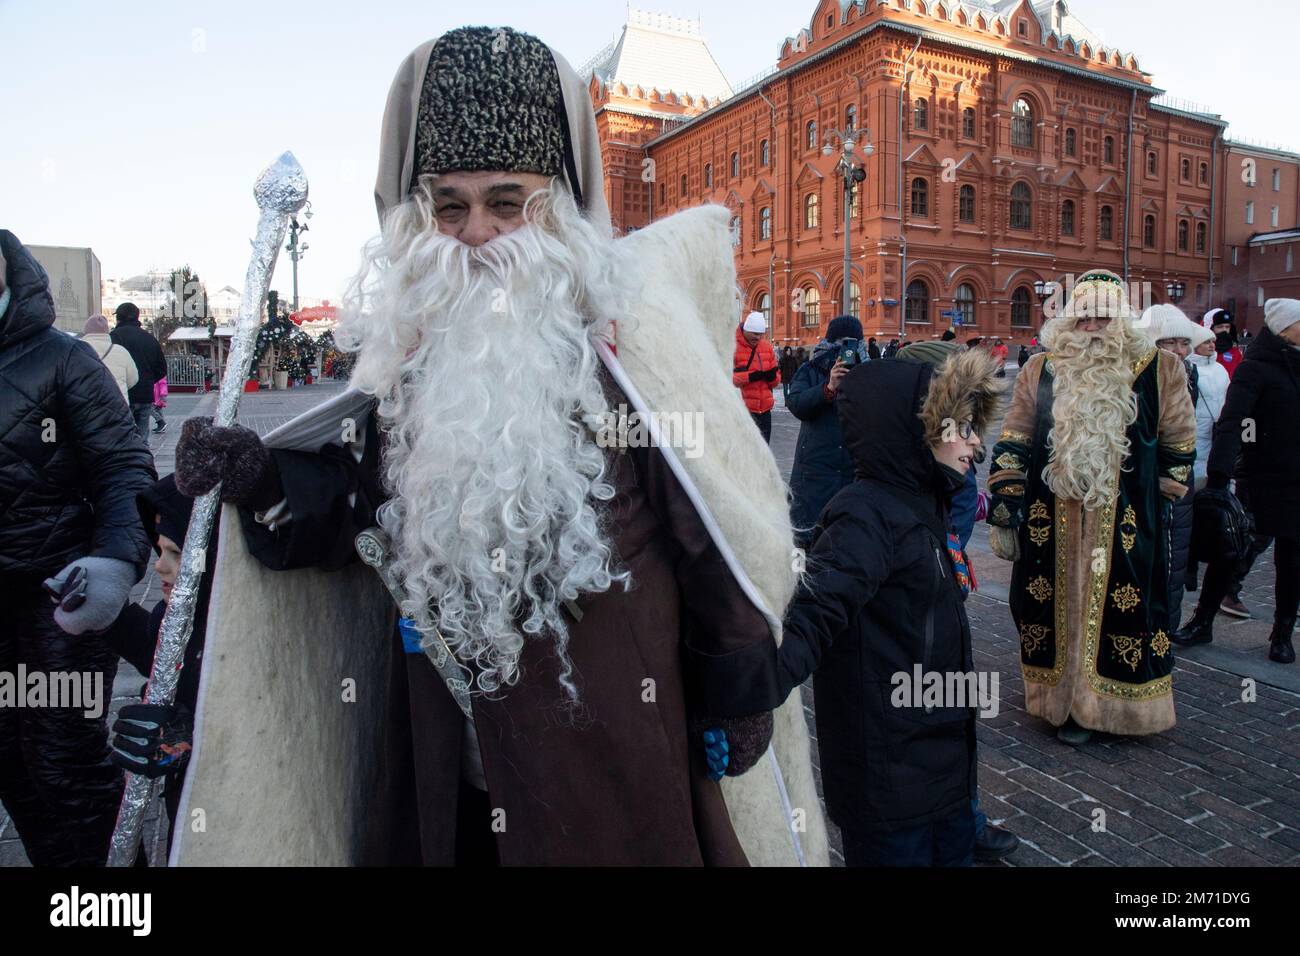 Moscow, Russia. 6th of January, 2023. Performers in Father Frost costumes are seen in the downtown of Moscow city, Russia. On 5-7 January, Moscow is hosting an event titled The Keepers of Winter Traditions, part of the annual festival A Journey To Christmas, in which Father Frosts from 14 regions of Russia are taking place. Father Frost (Ded Moroz) is a Russian equivalent of Santa. Nikolay Vinokurov/Alamy Live News Stock Photo